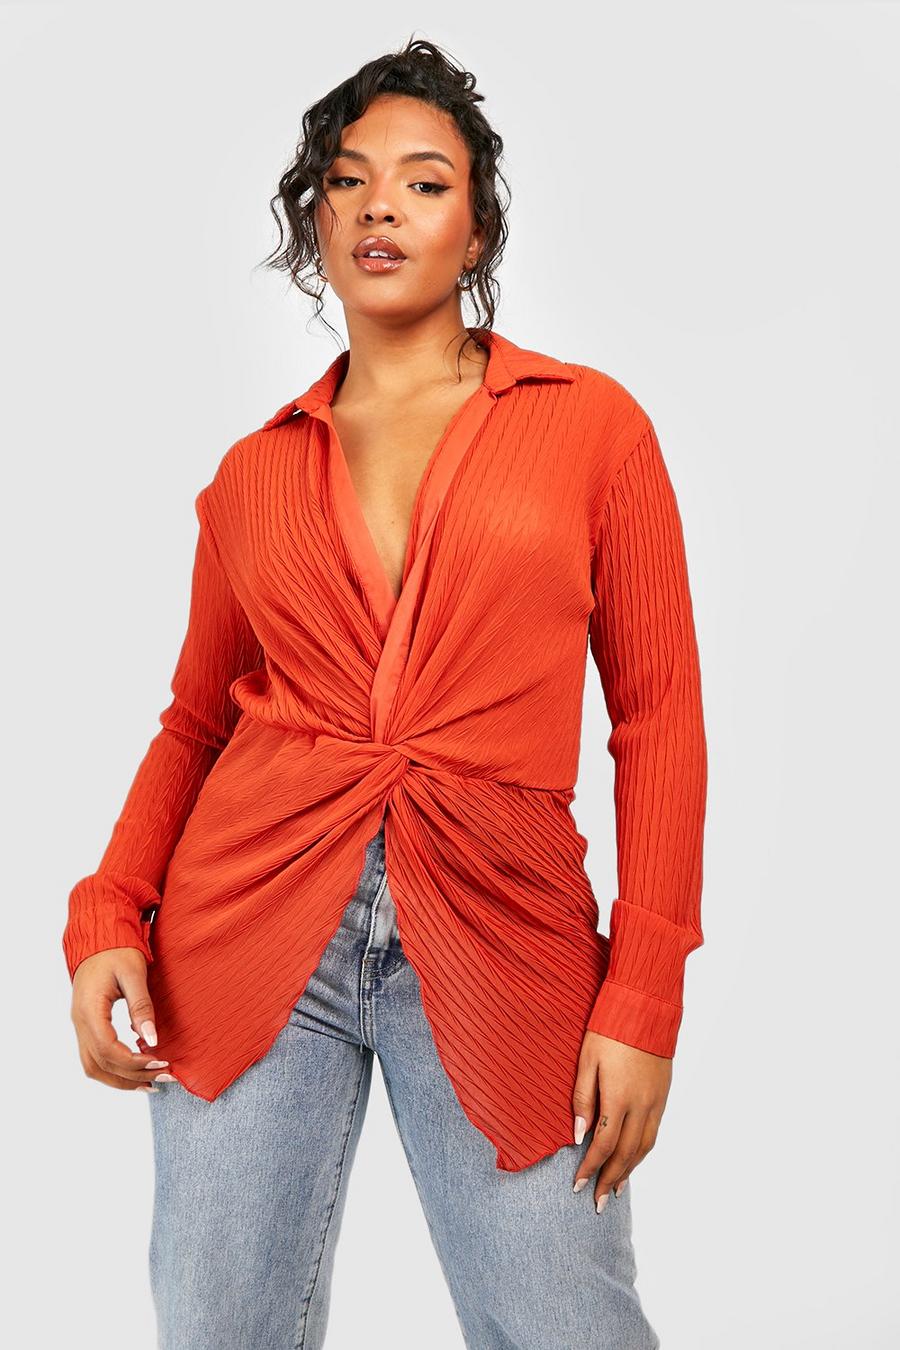 Red Women's Plus-Size Tops & Blouses